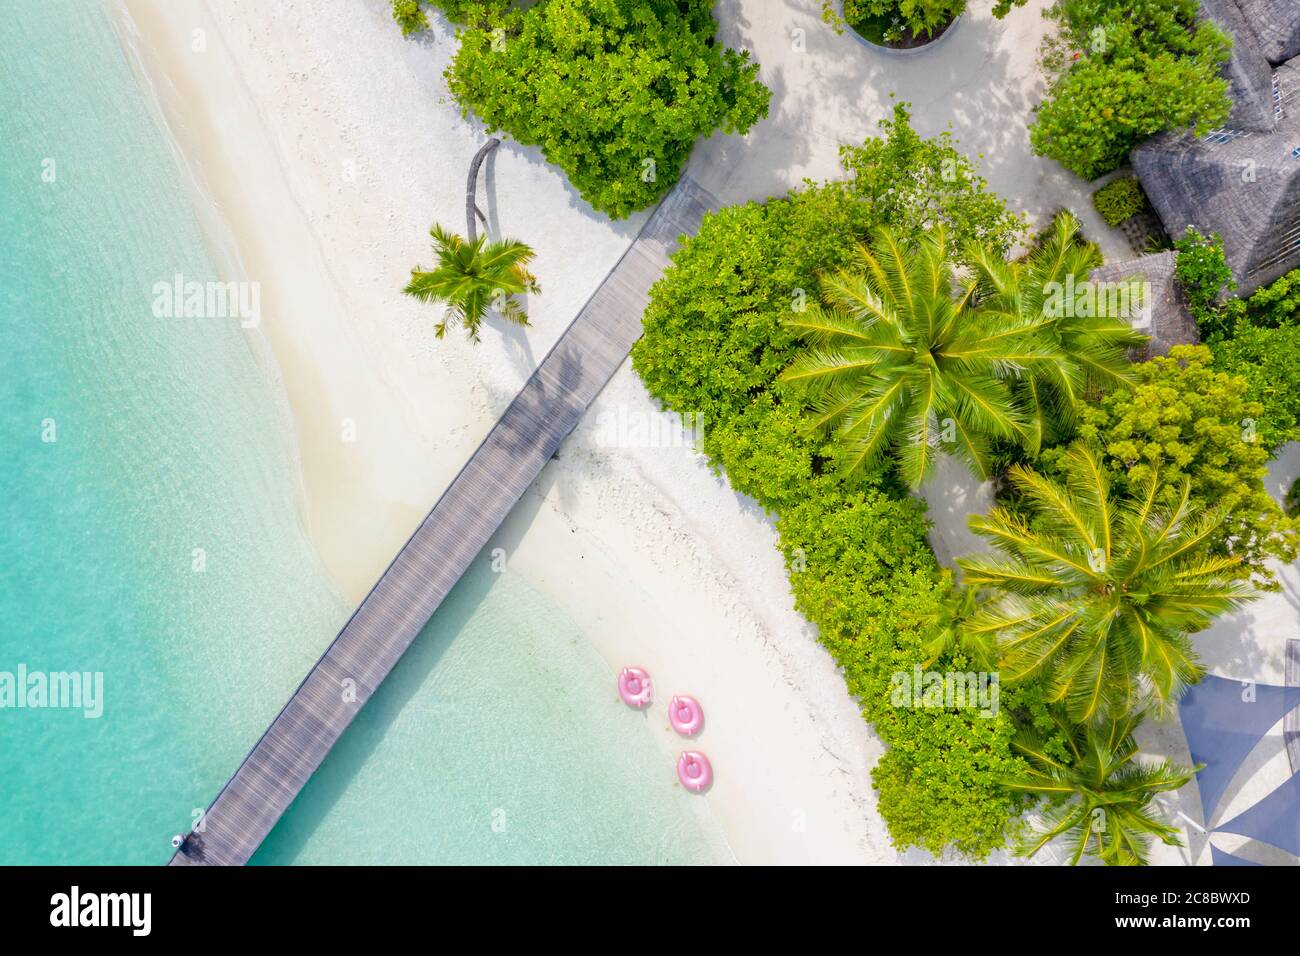 Perfect aerial landscape, luxury tropical resort or hotel with water villas and beautiful beach scenery. Amazing bird eyes view in Maldives, landscape Stock Photo